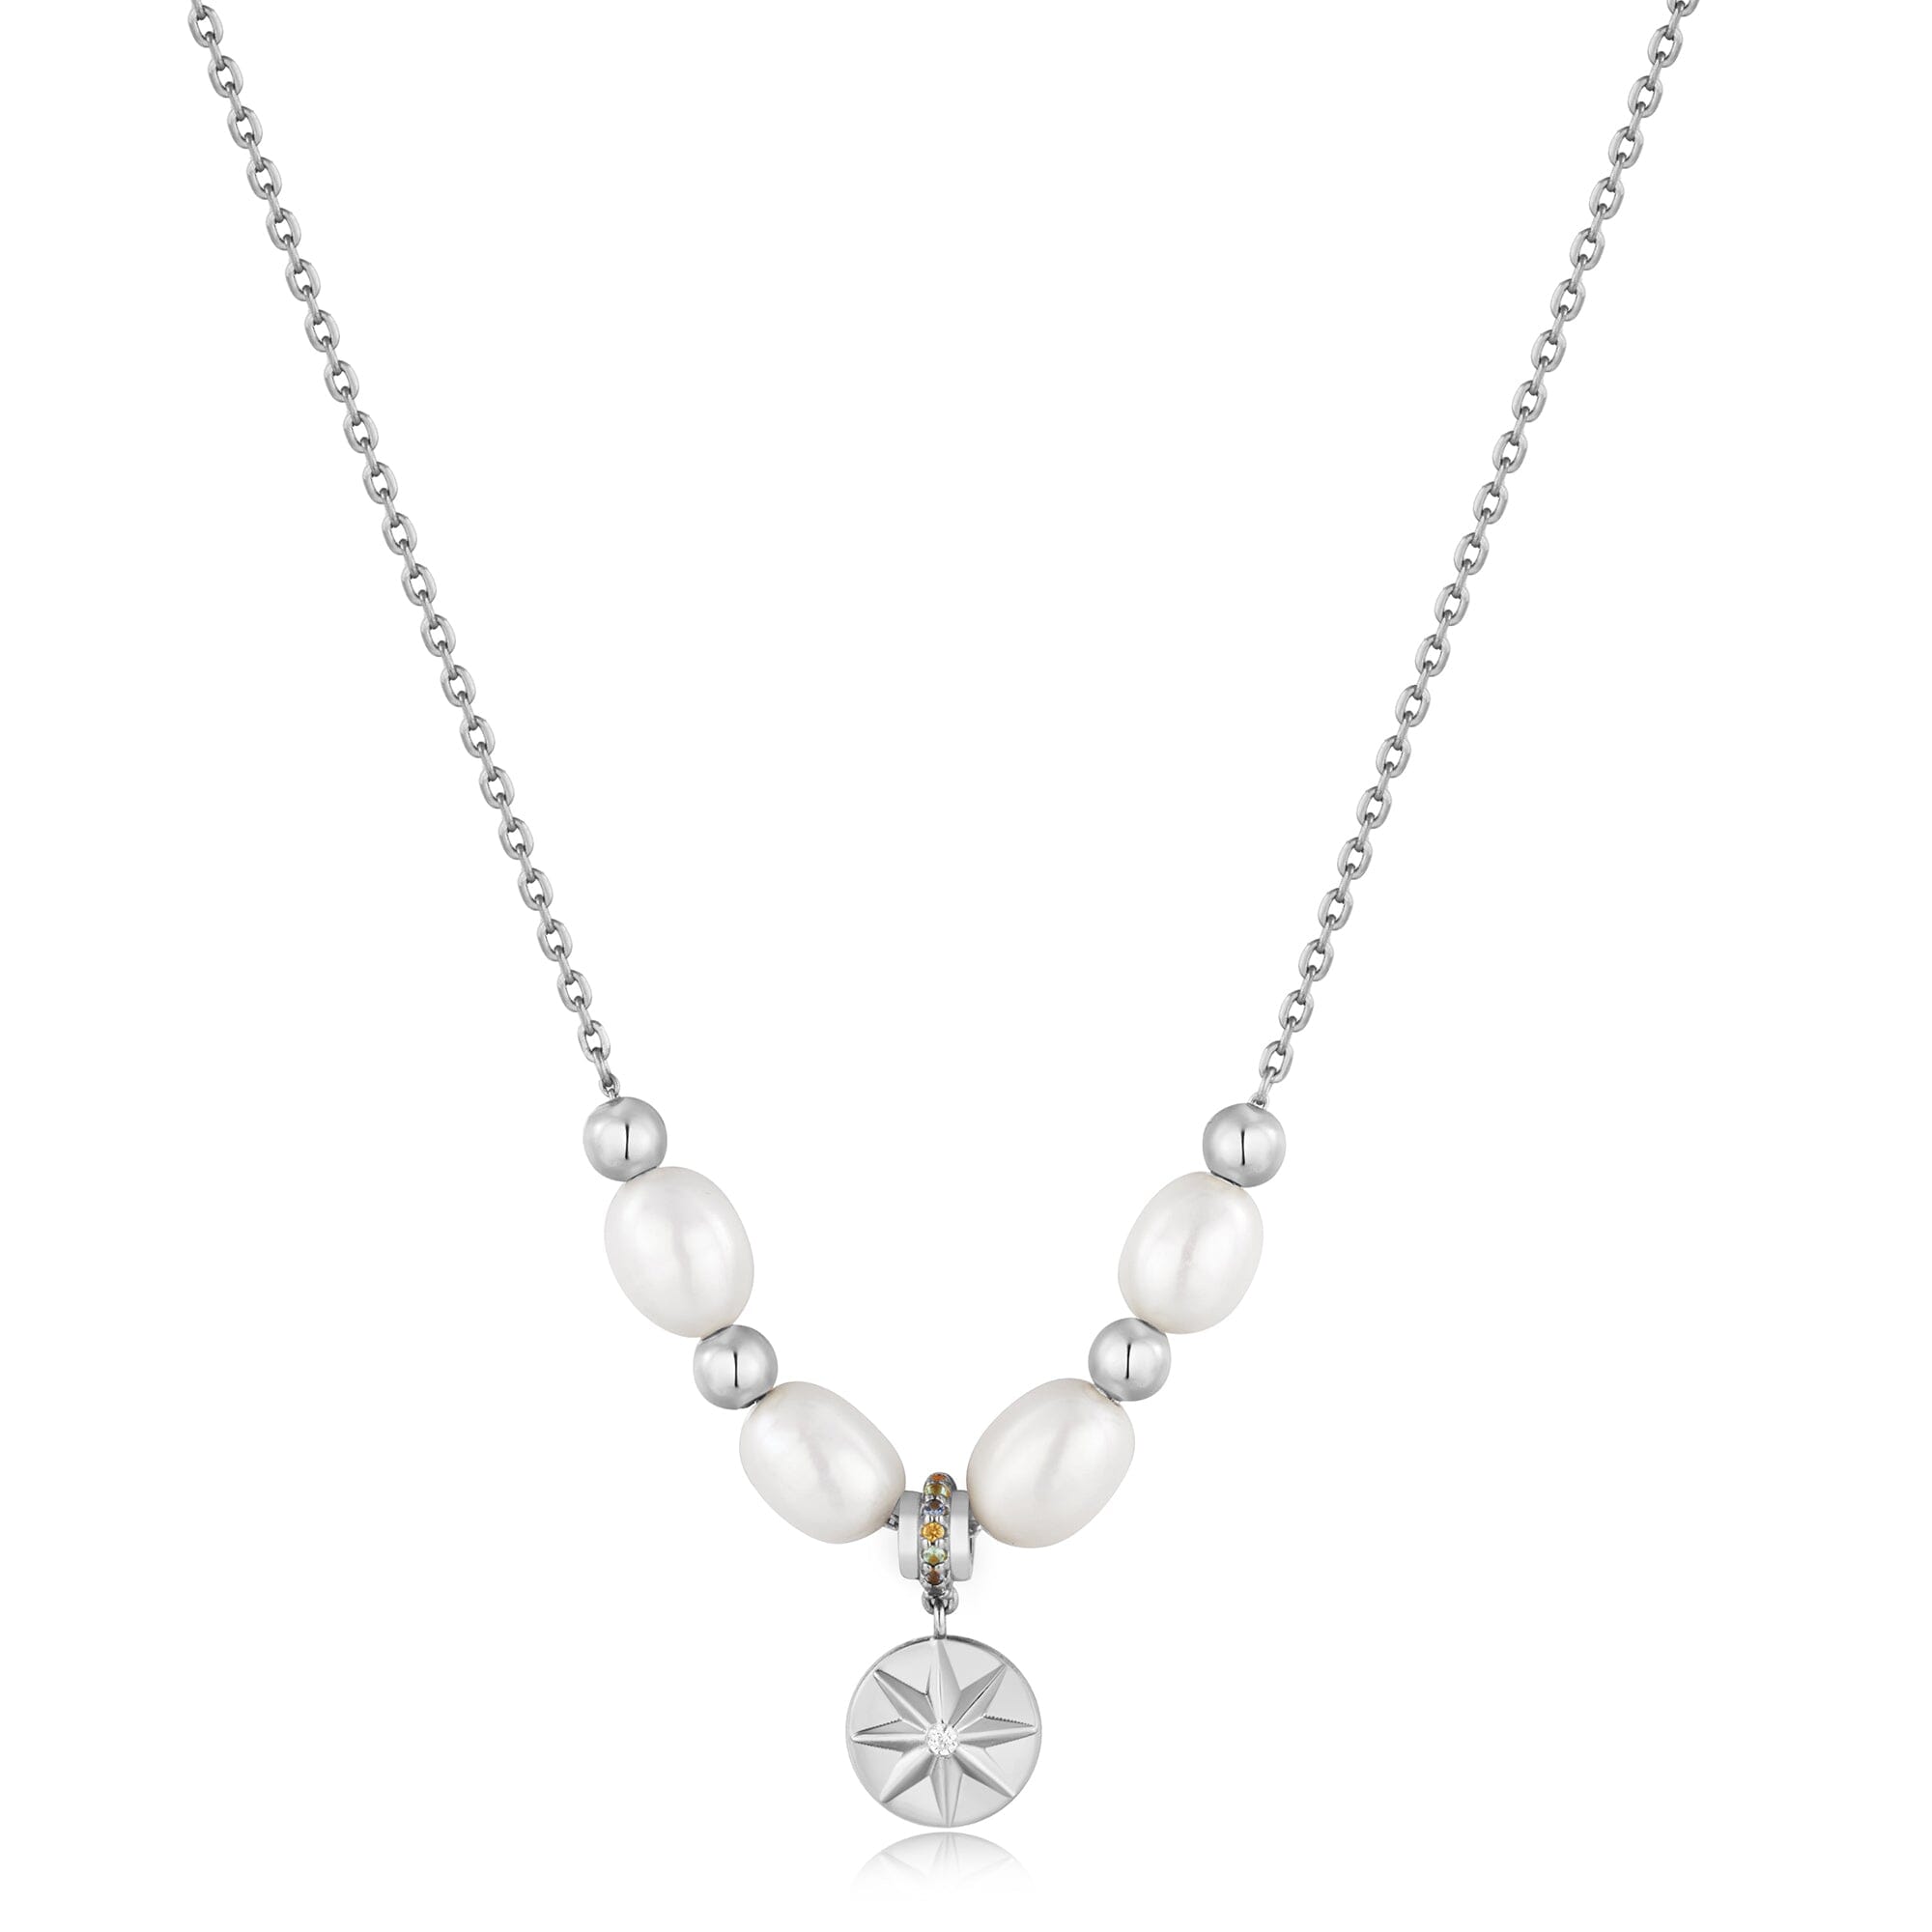 Ania Haie Silver Pearl Star Pendant Necklaces Necklaces Ania Haie 